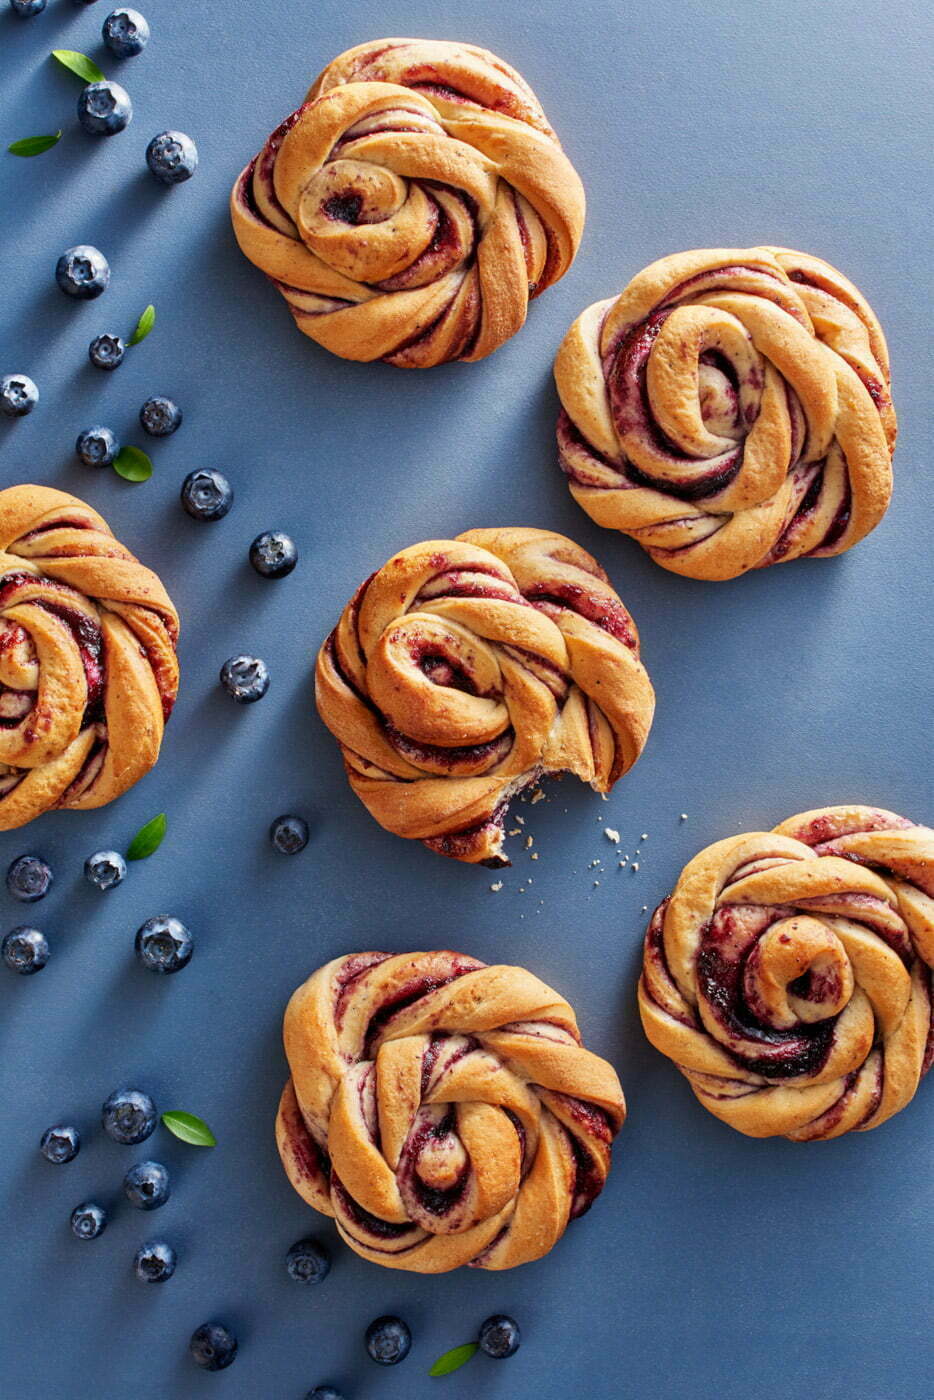 Six_swirly_blueberrie_buns_with_blueberries_on_a_blue_background_by_Elina_Himanen